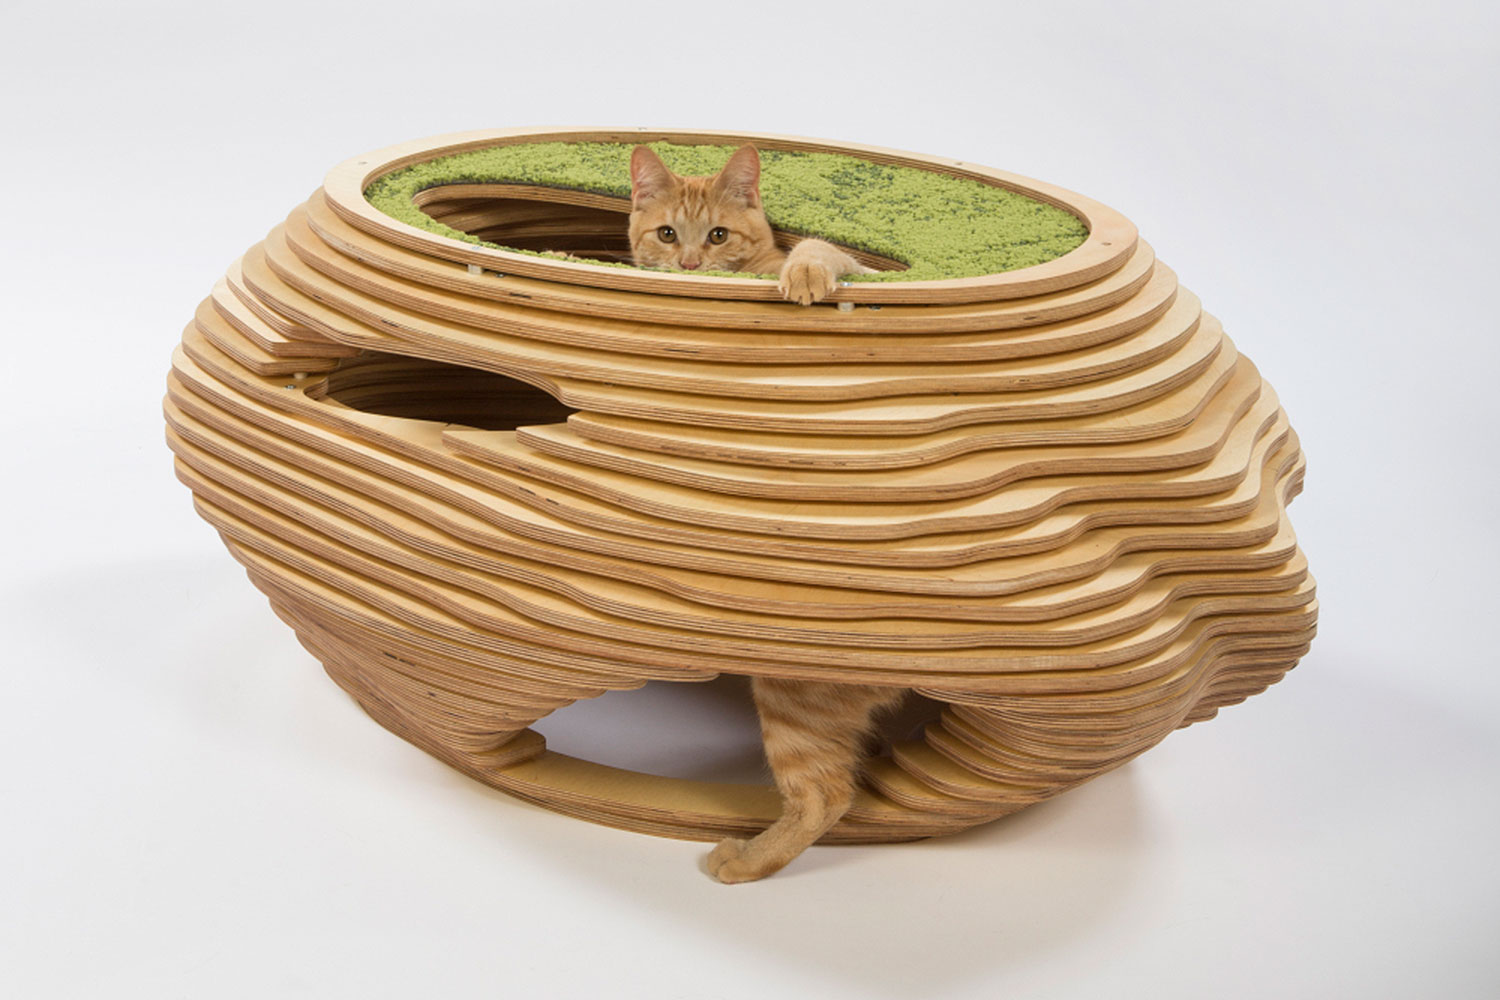 architects for animals design amazing cat houses abramsonteiger  photo credit meghan bob photography